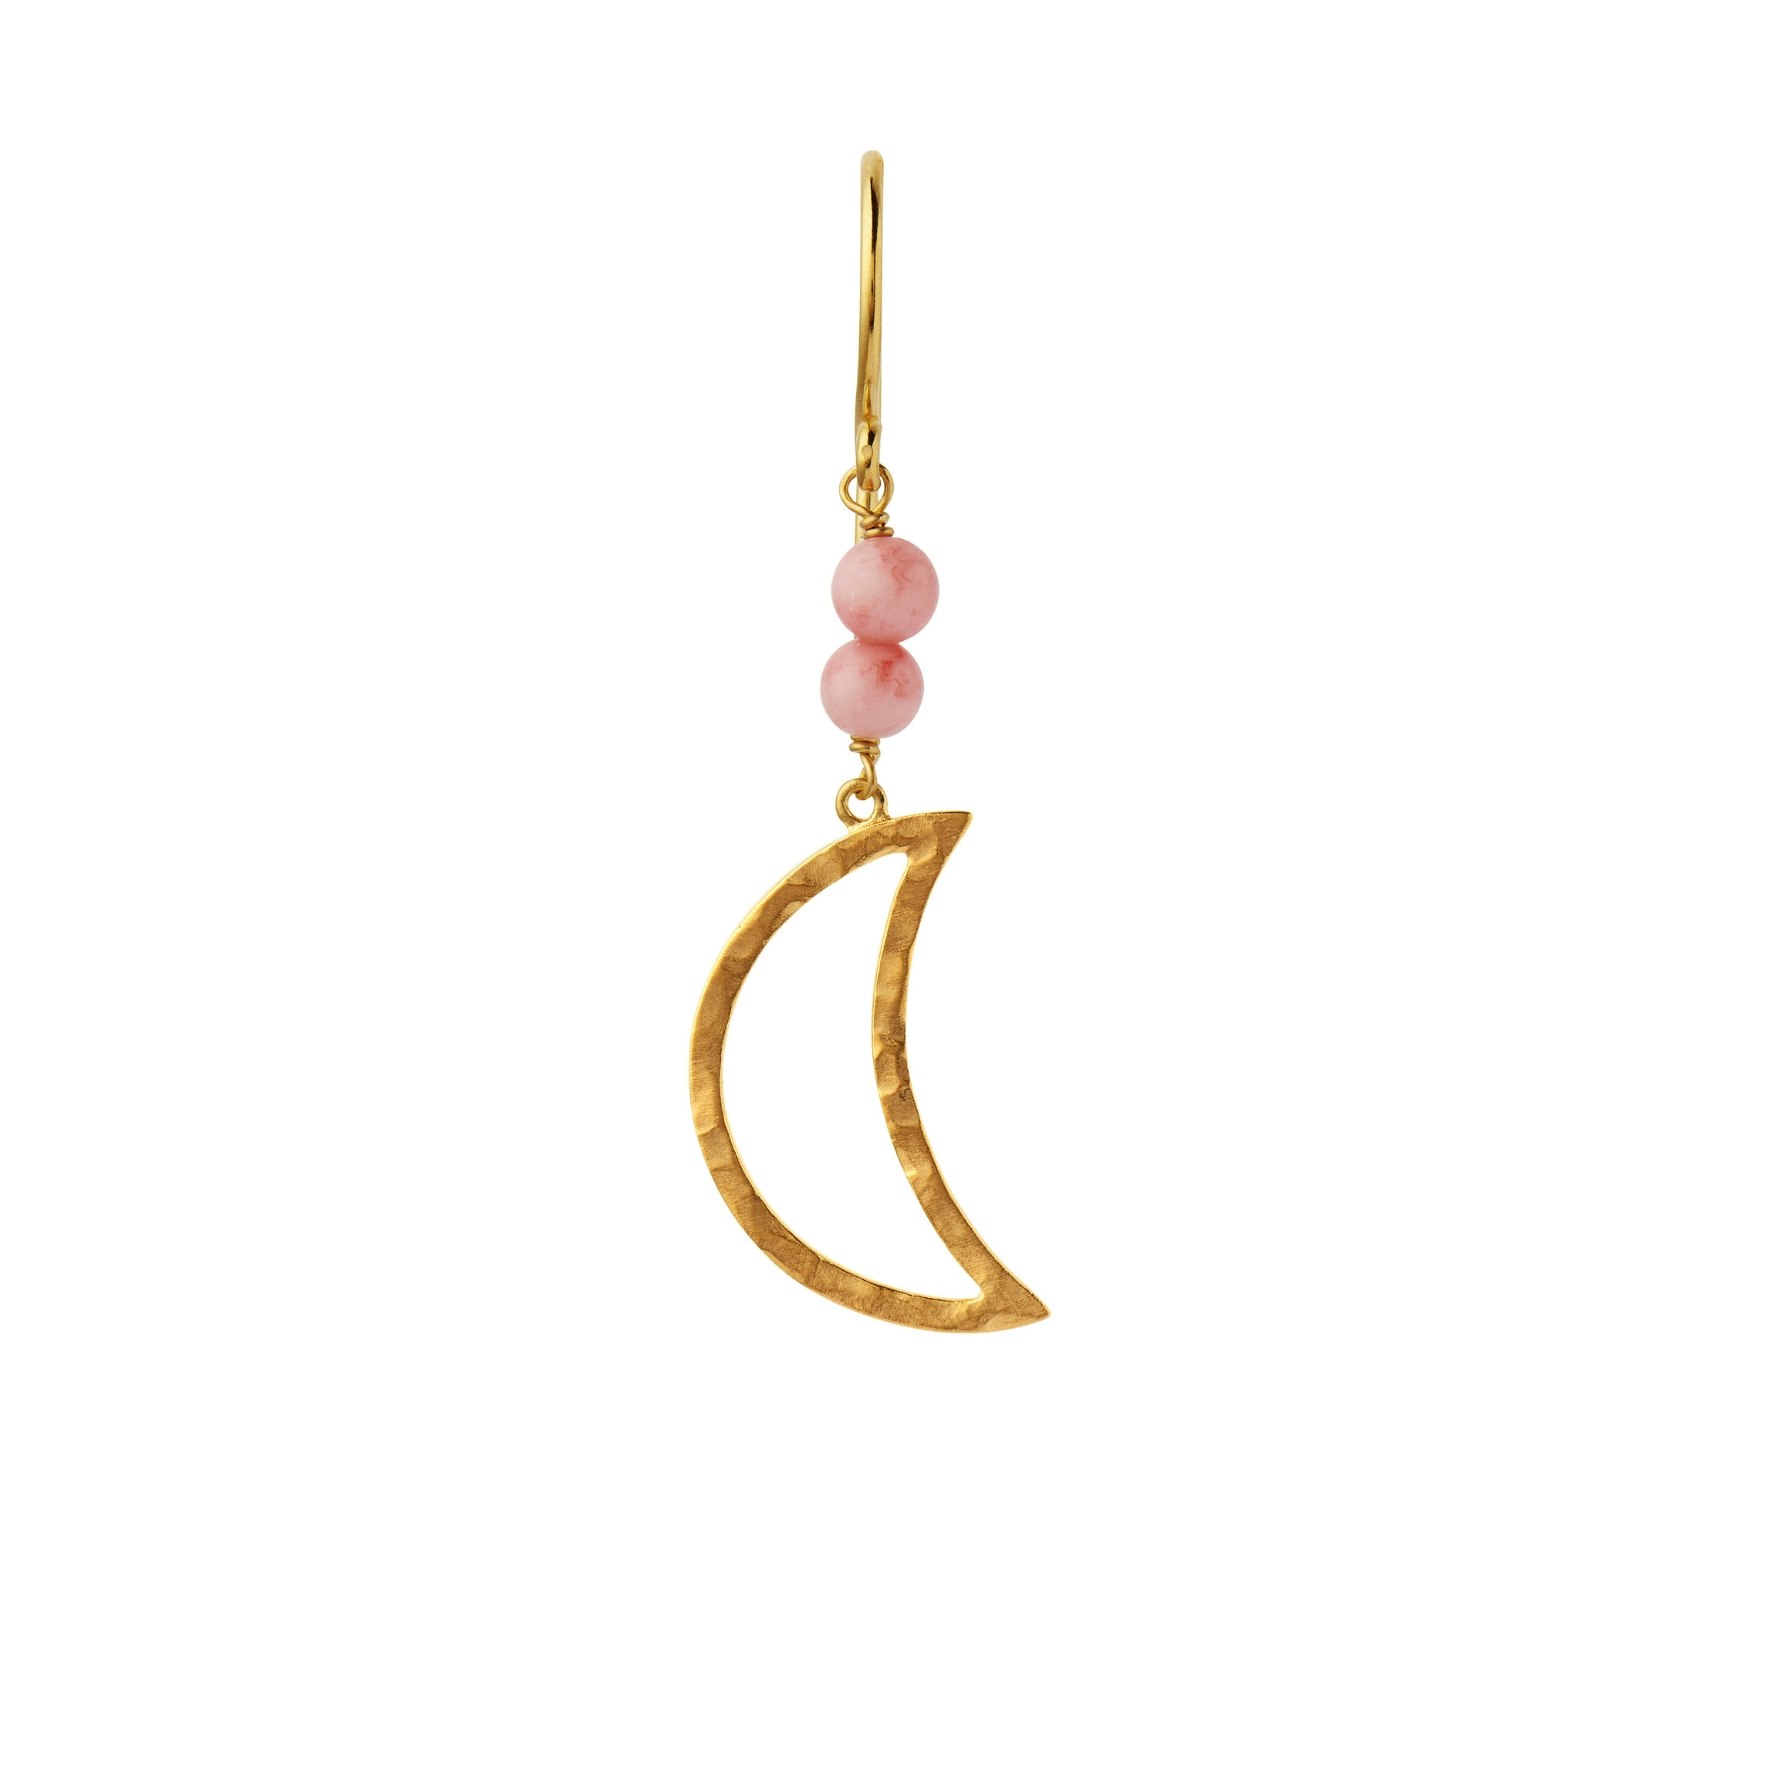 Big Bella Moon Earring Coral from STINE A Jewelry in Goldplated Silver Sterling 925